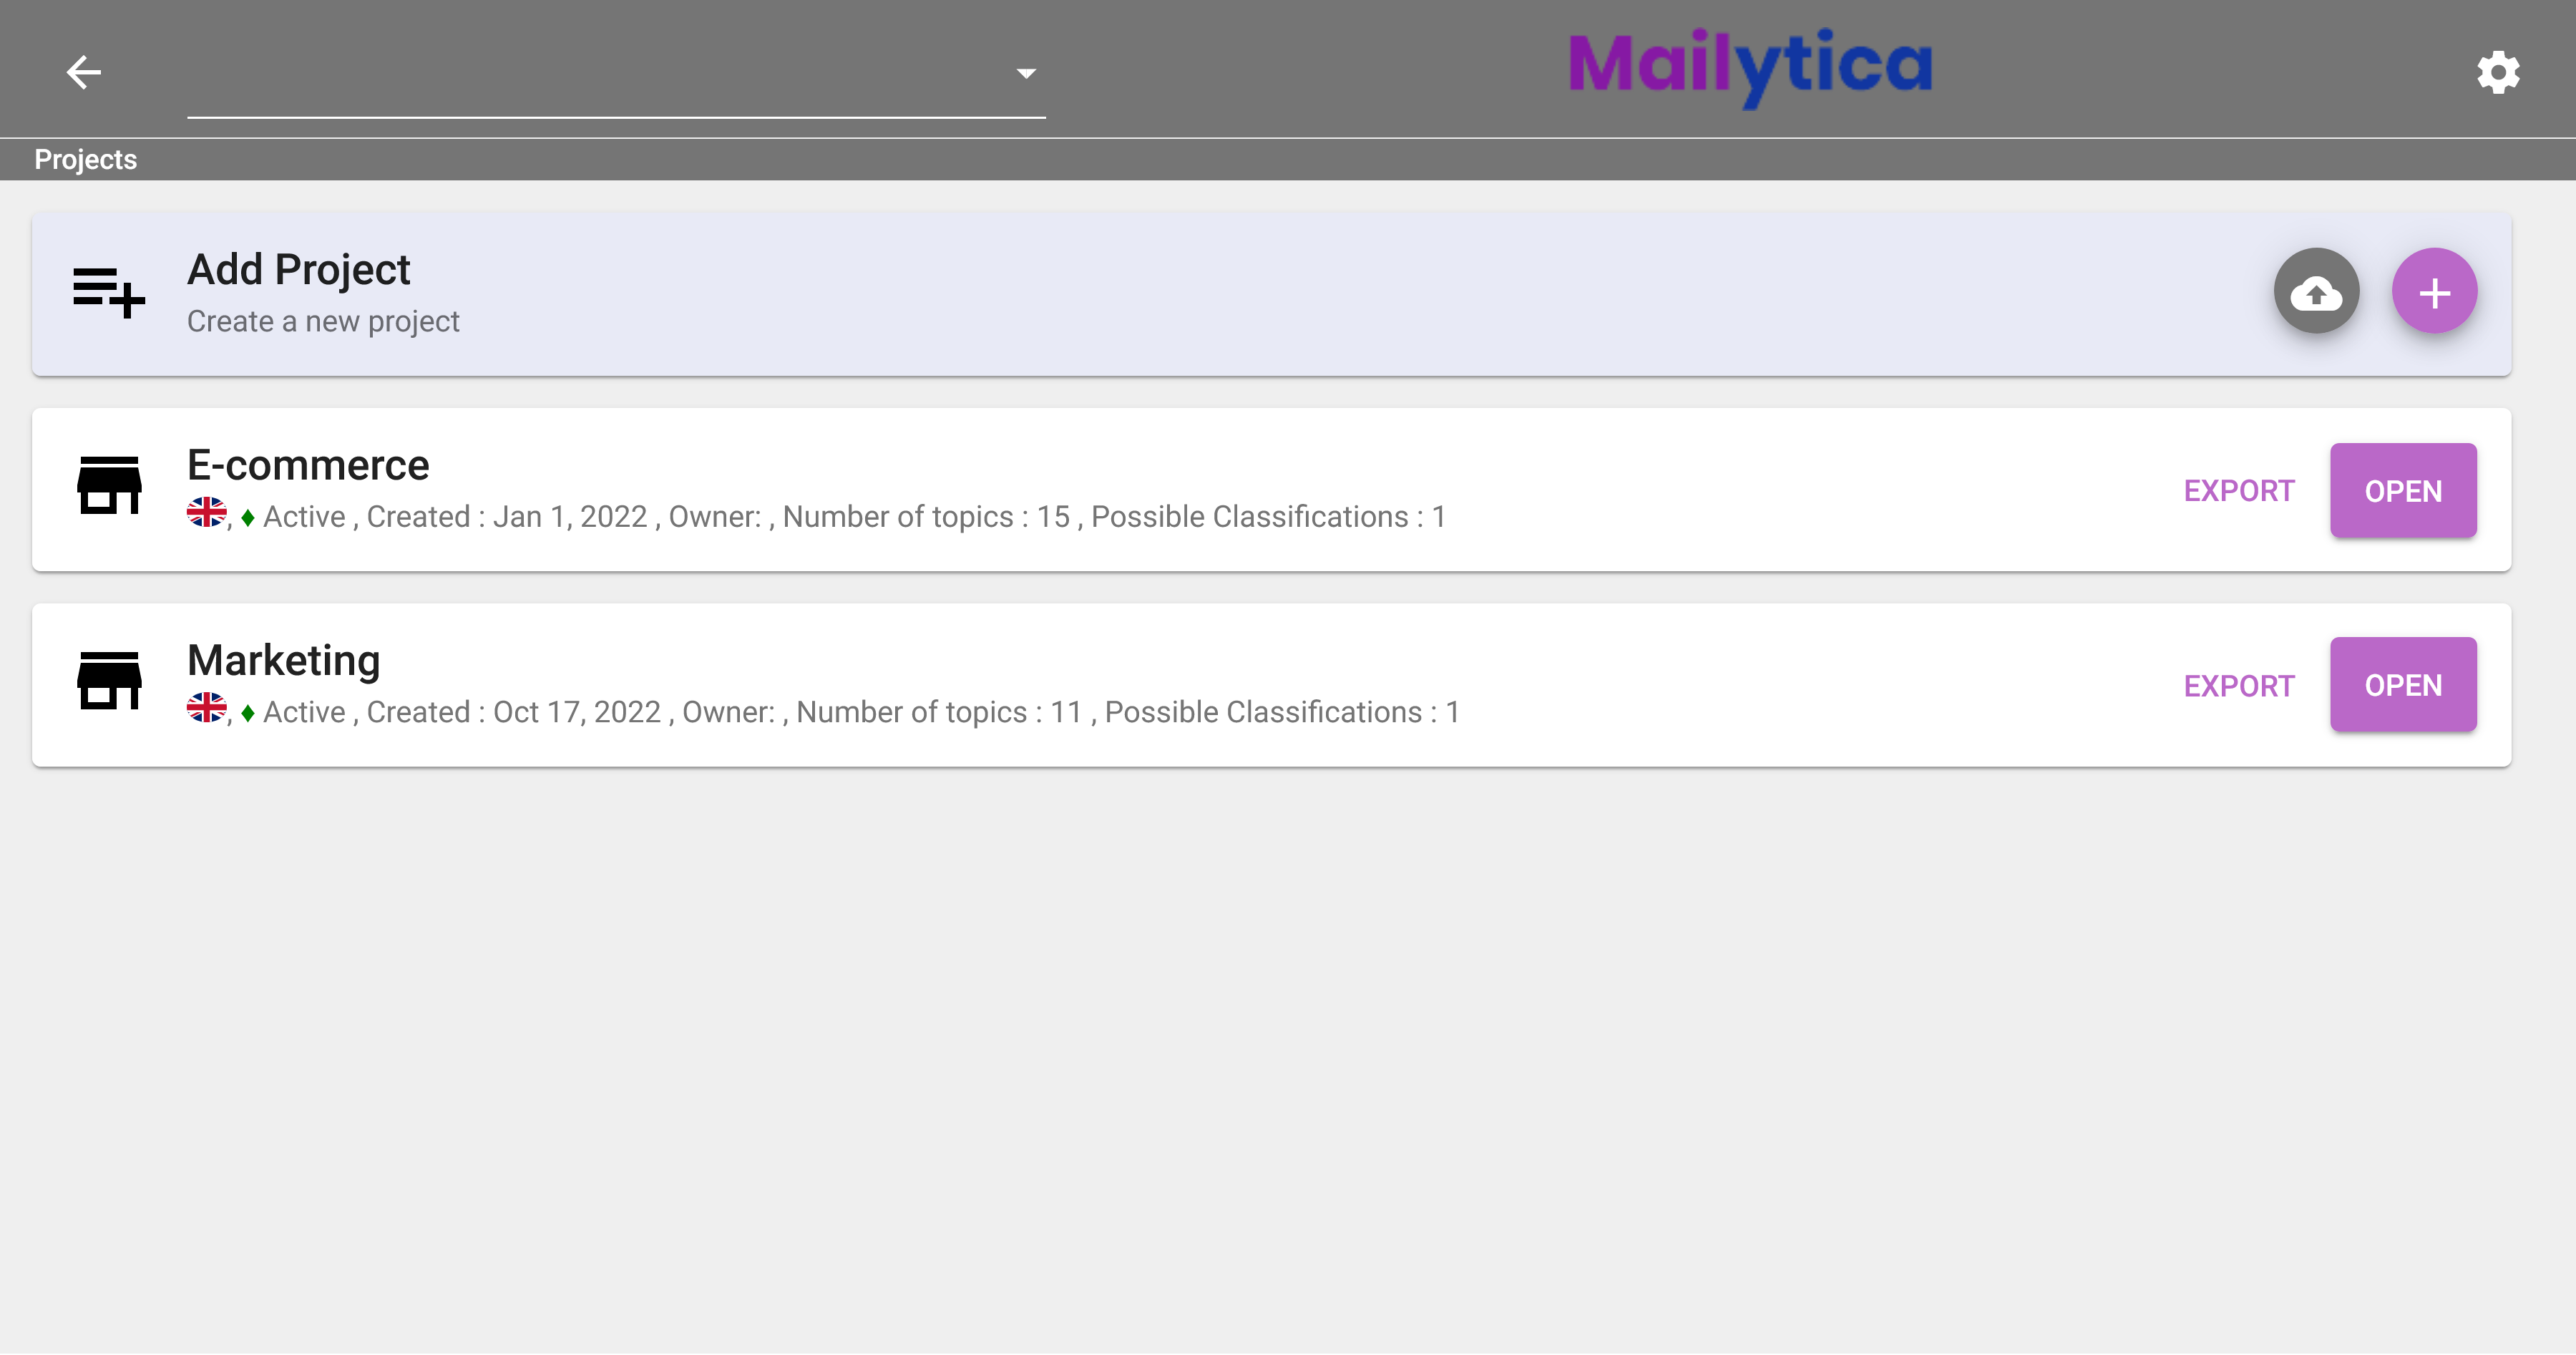 Projects screen in mailytica.cloud